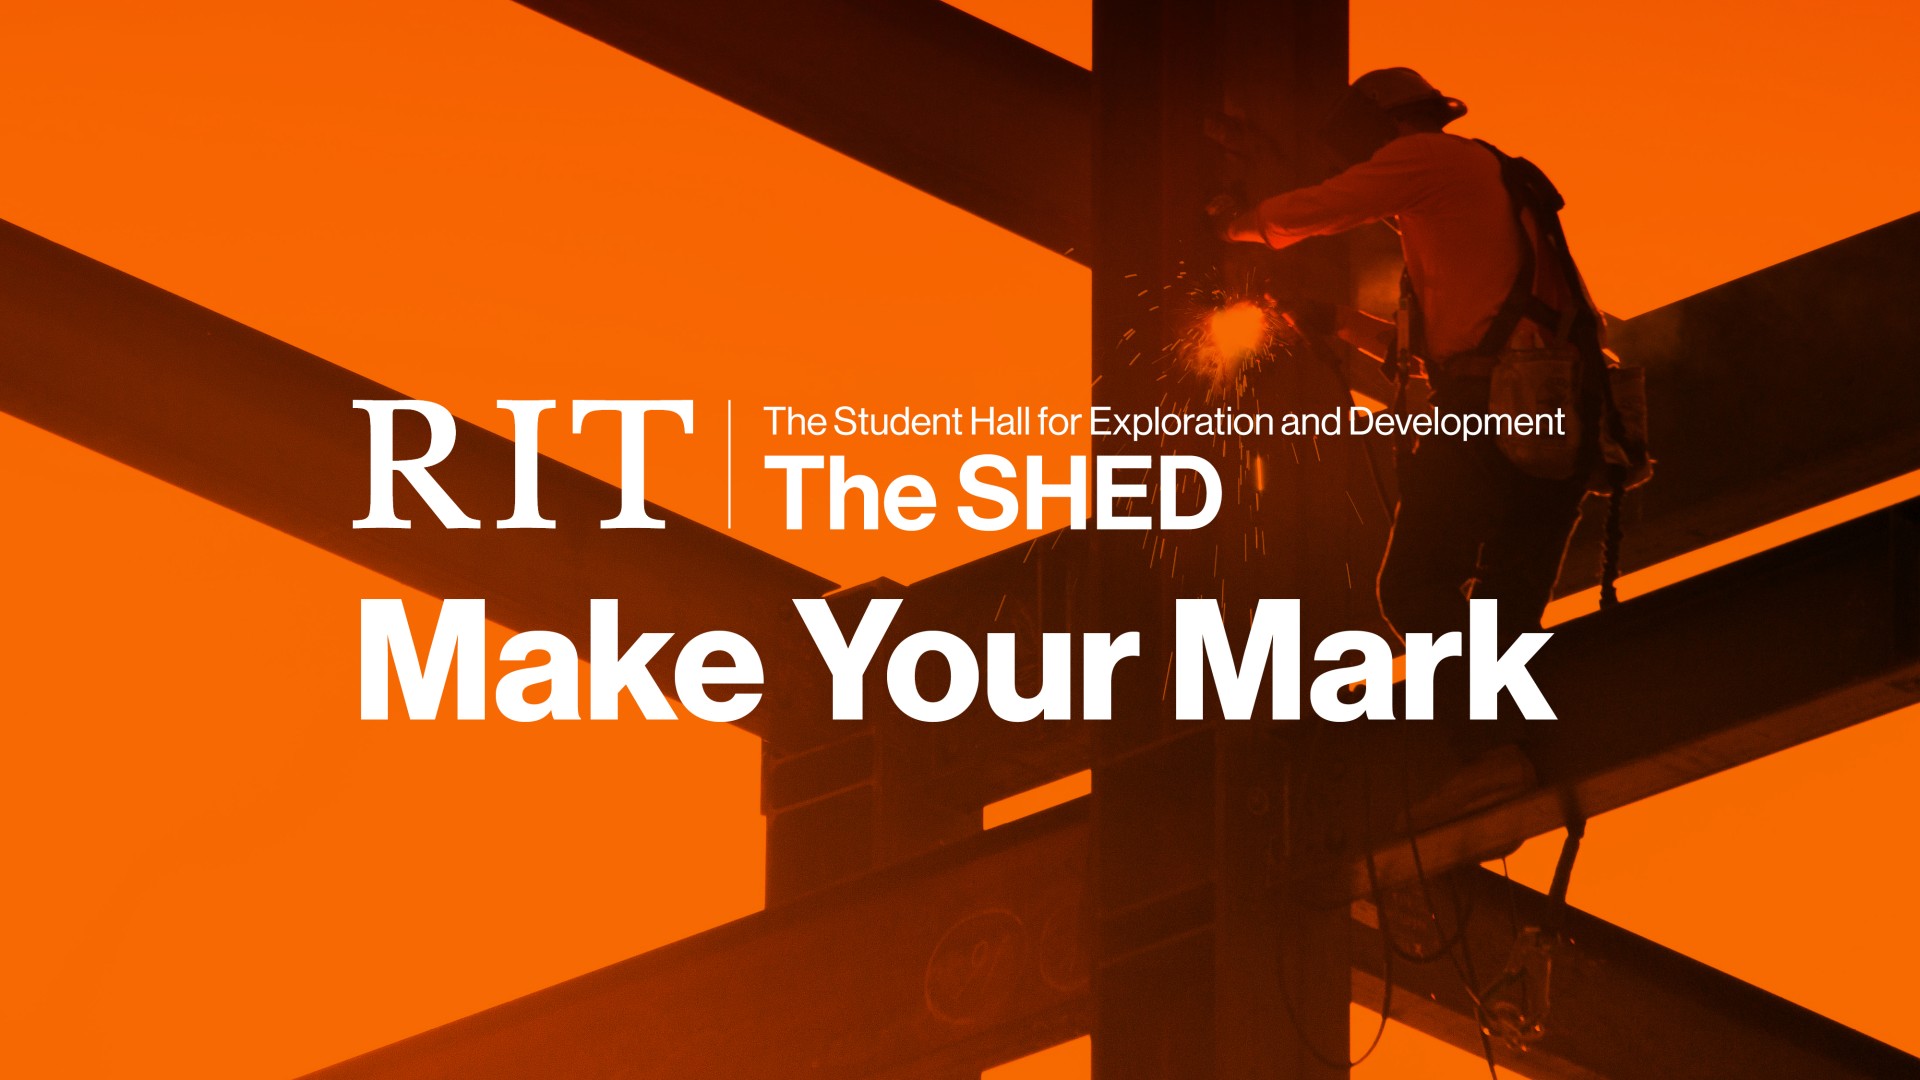 SHED Make Your Mark